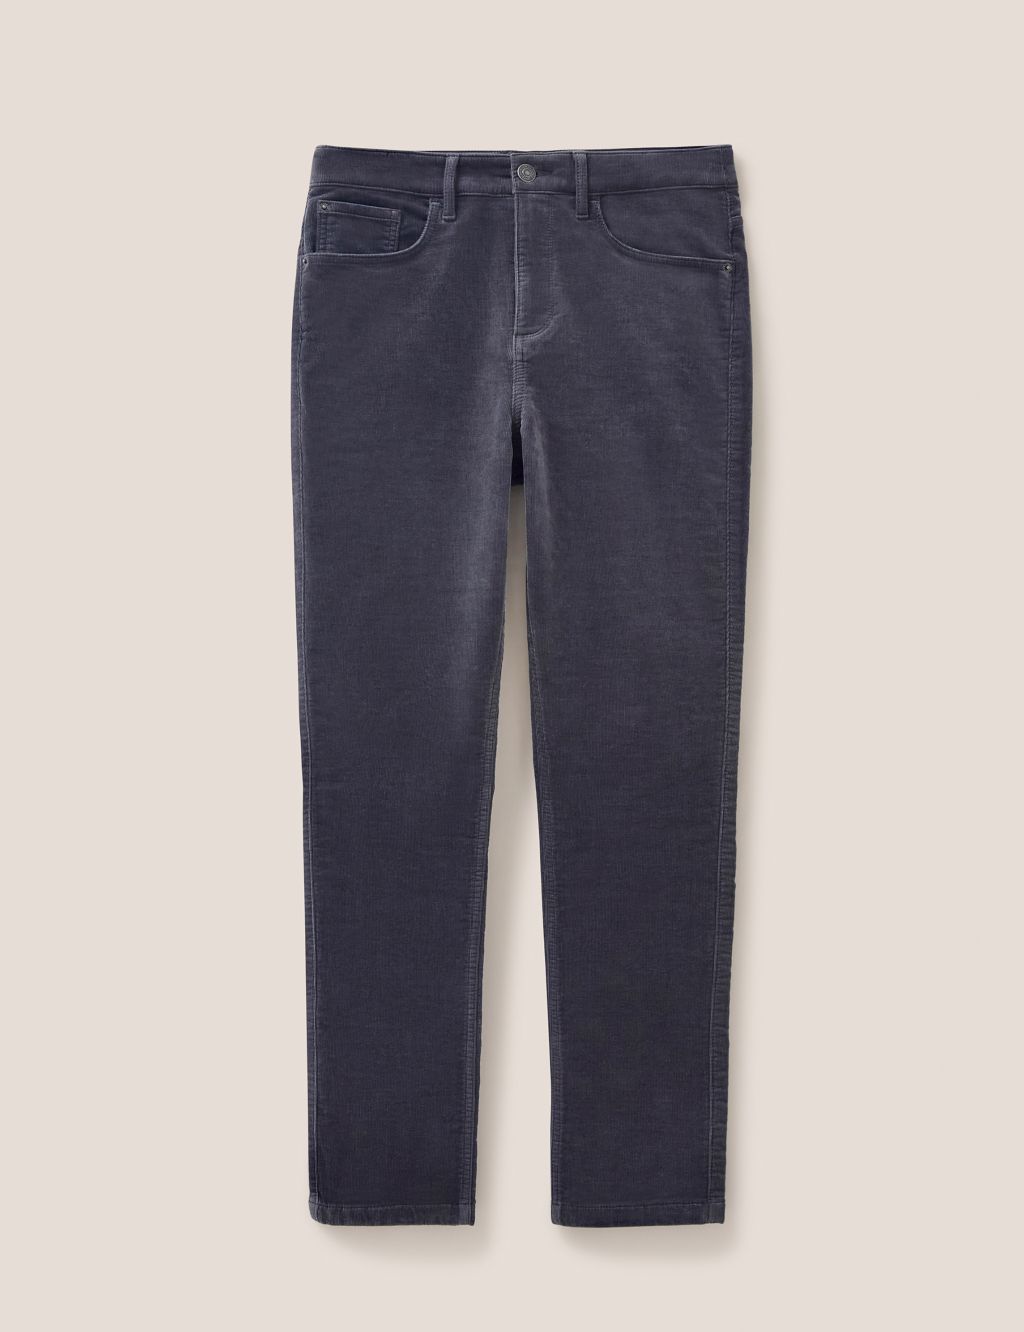 Cord Skinny Trousers image 2